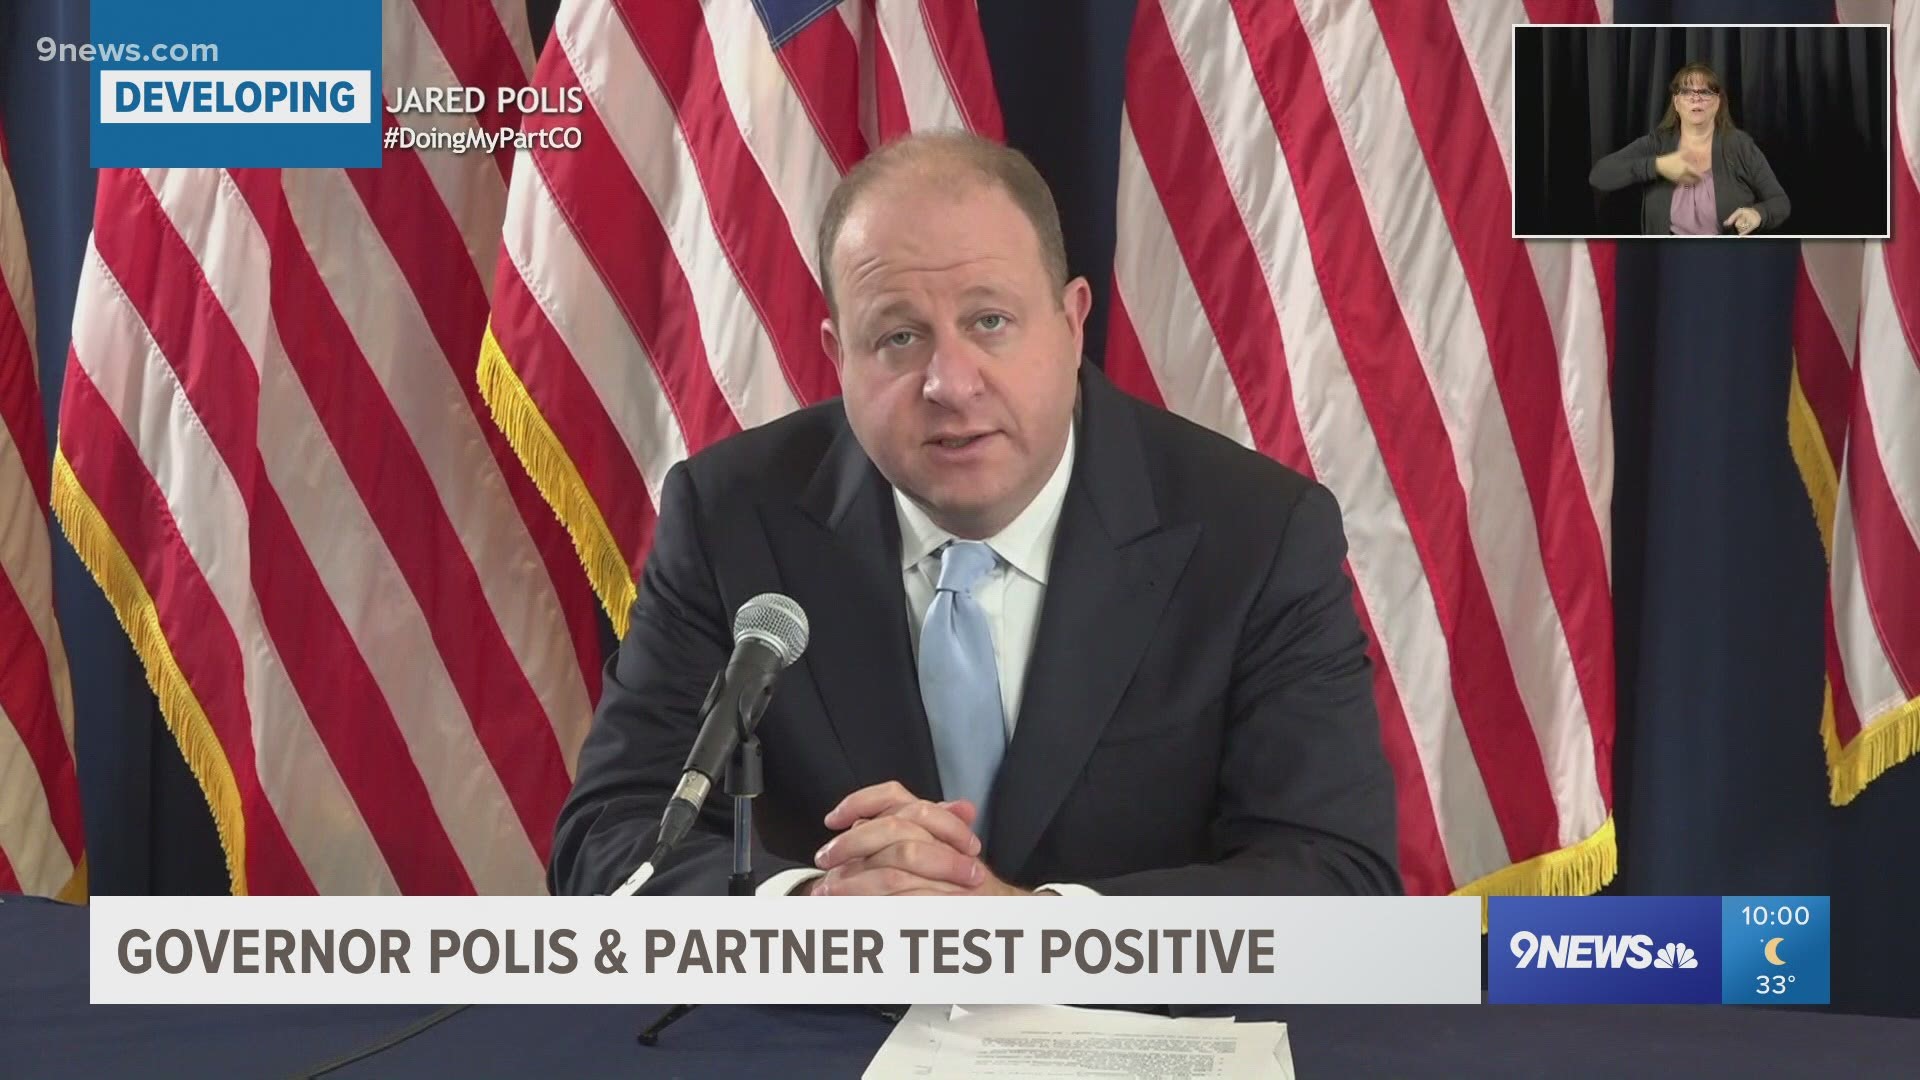 Polis had been quarantining since Wednesday after being exposed to someone else who had tested positive.